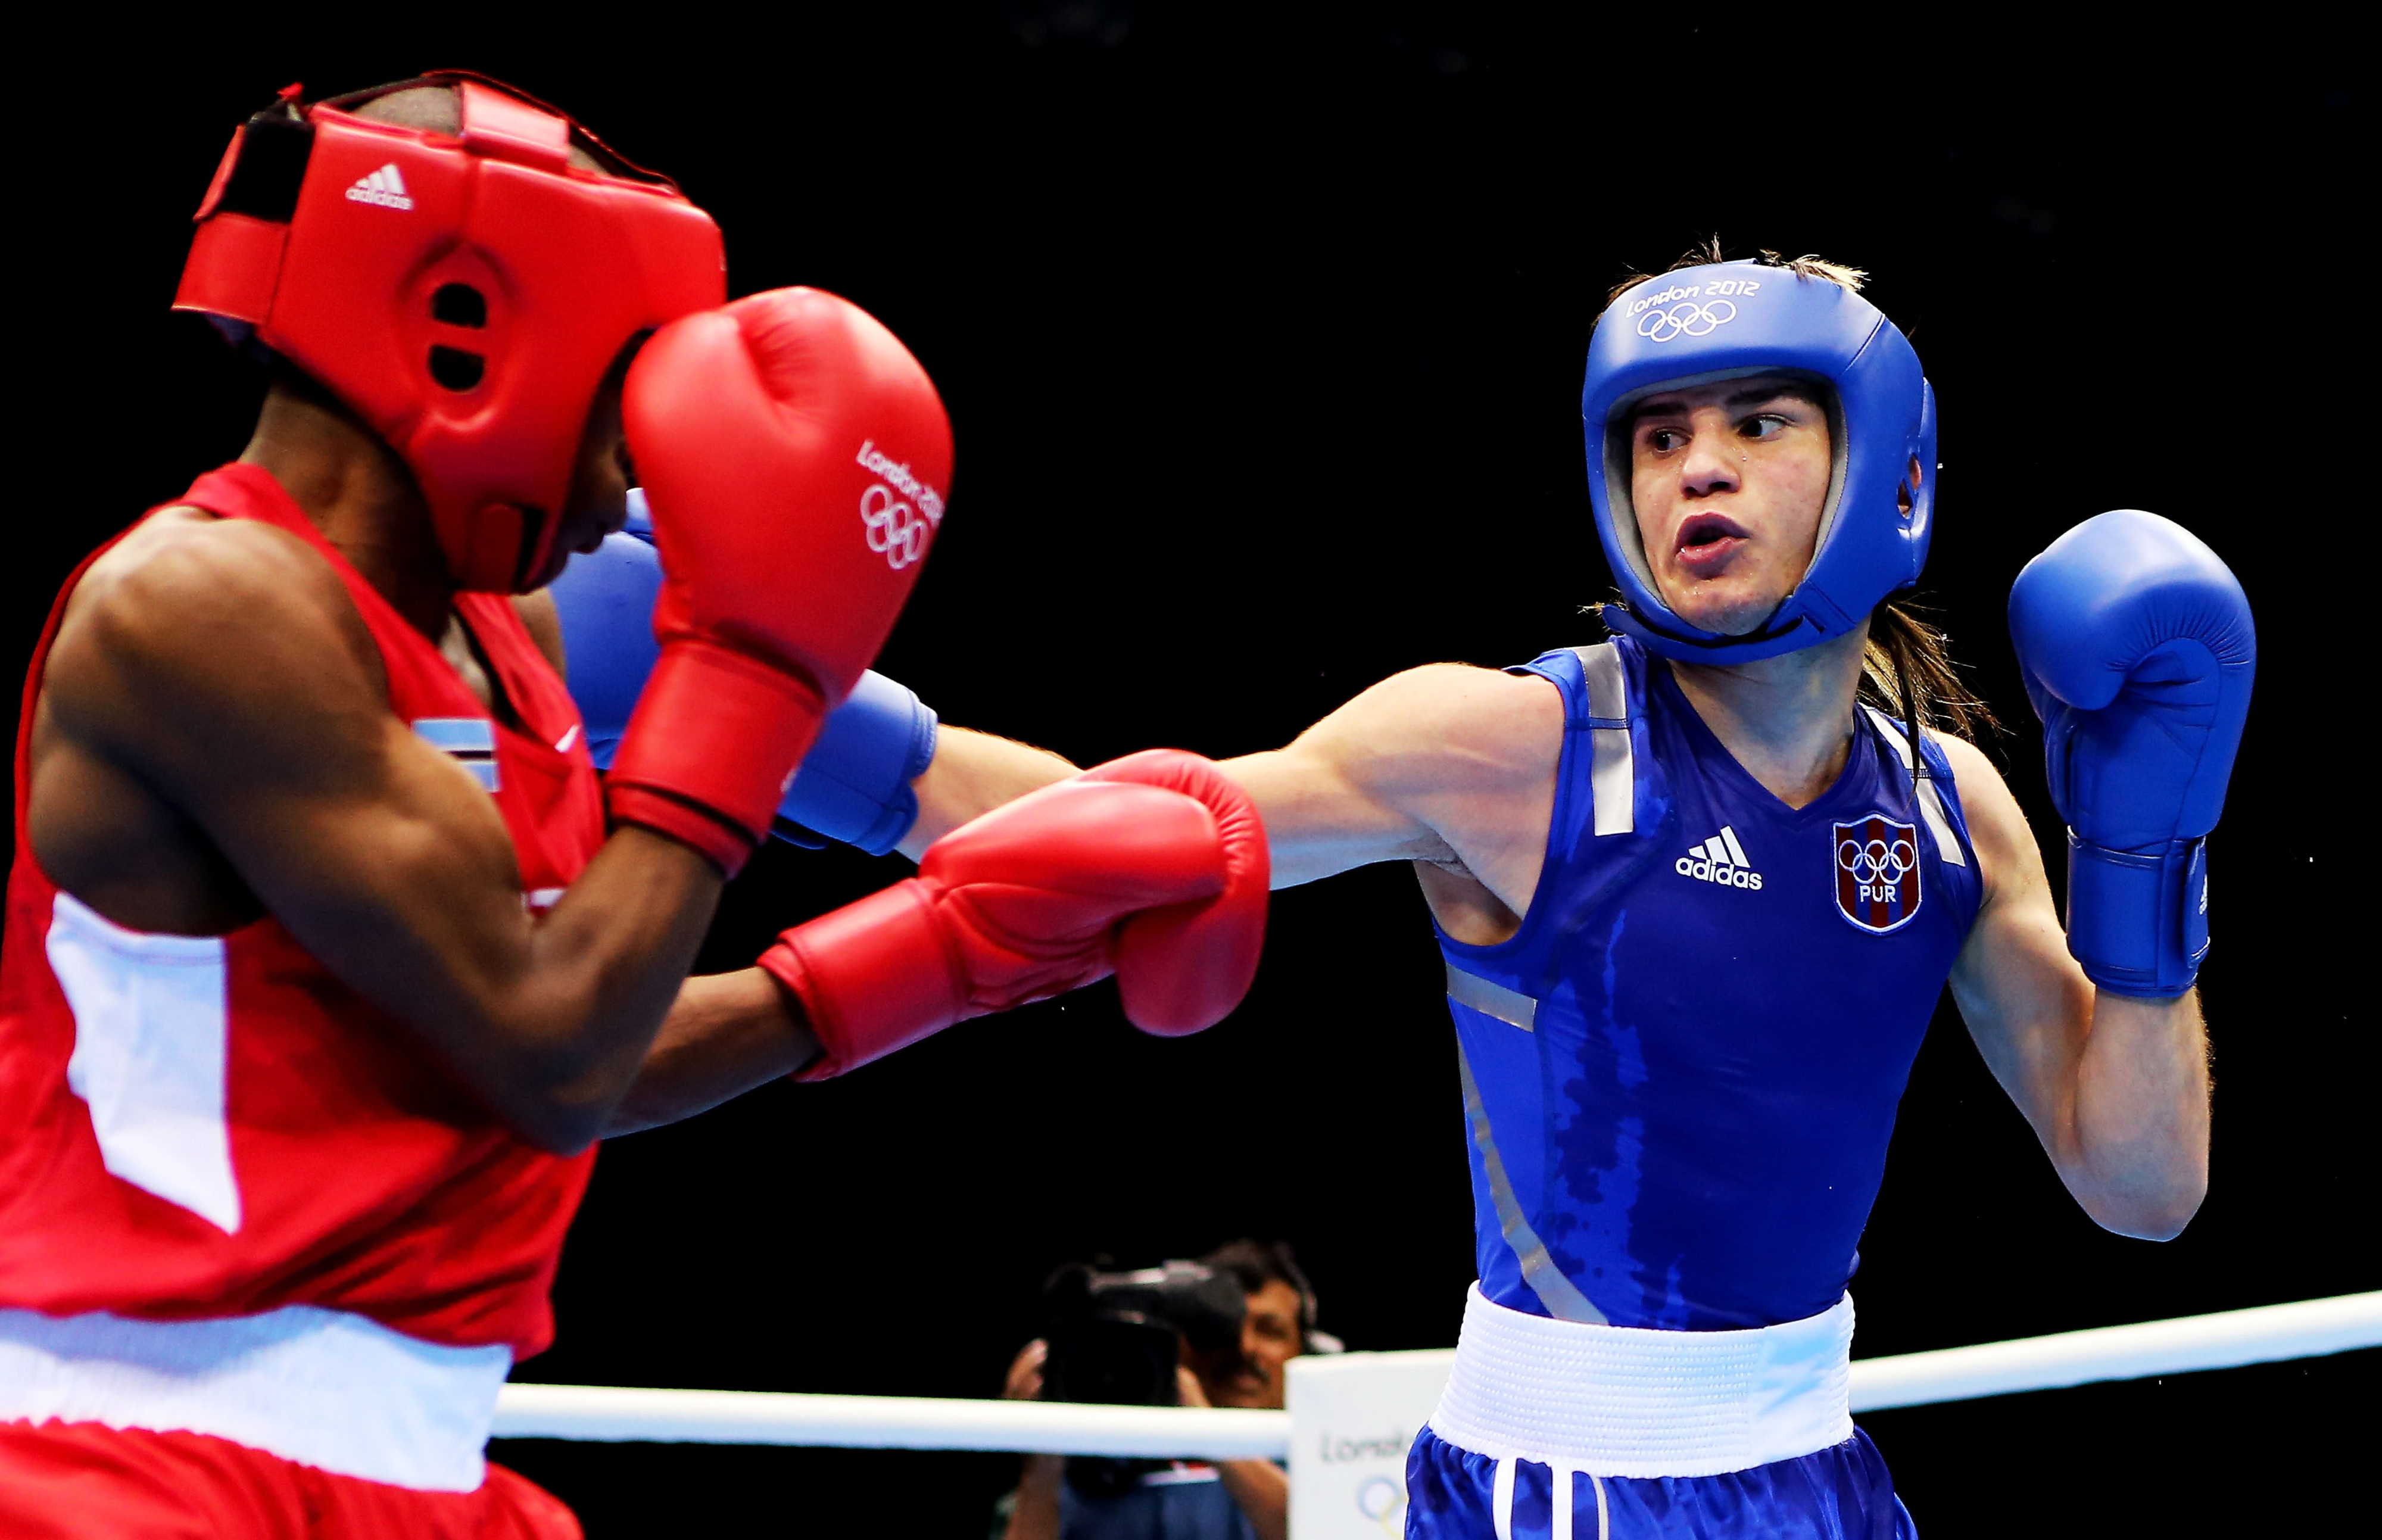 Jeyvier Cintron (seen here in the round of 32) of Puerto Rico got past Brazil's Juliao Henriques this morning in London, advancing to the flyweight quarterfinals. (Photo by Scott Heavey/Getty Images)